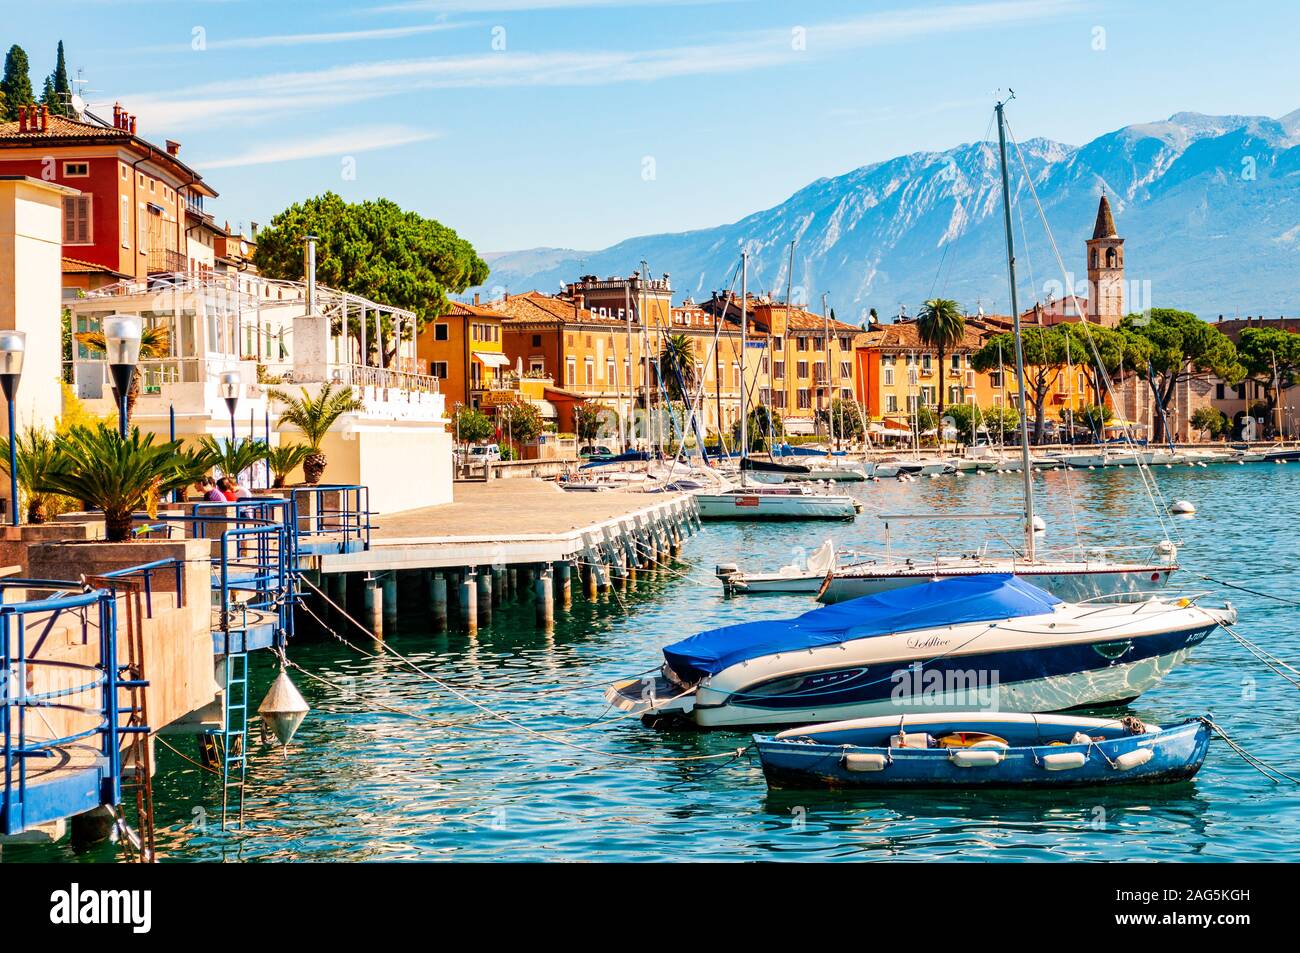 Toscolano Maderno, Lombardy, Italy - September 12, 2019: View on sailing yachts and boats parked on crystal clear blue water of amazing lake Garda and Stock Photo